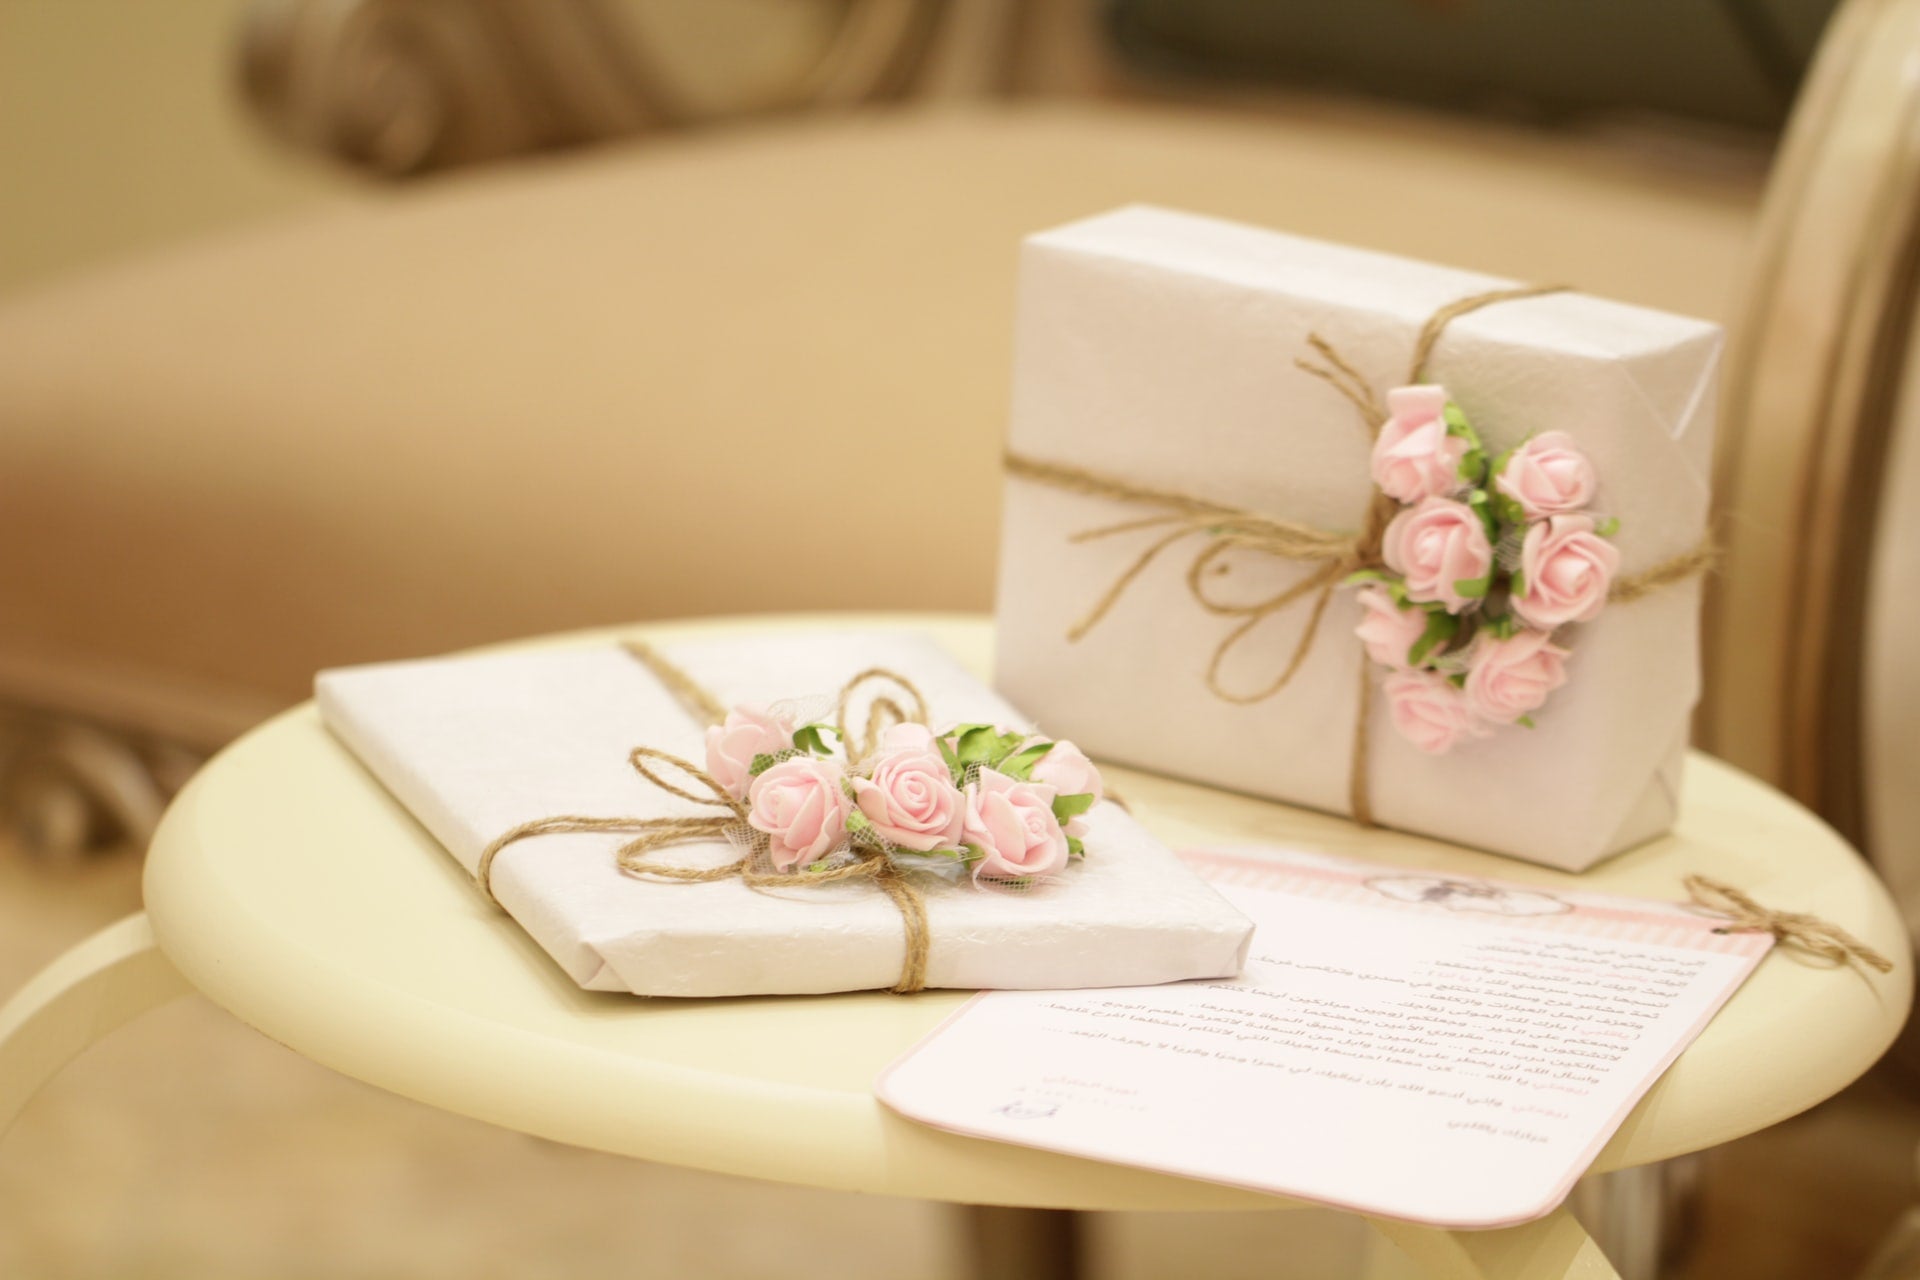 Wrapped gifts with twine and flowers